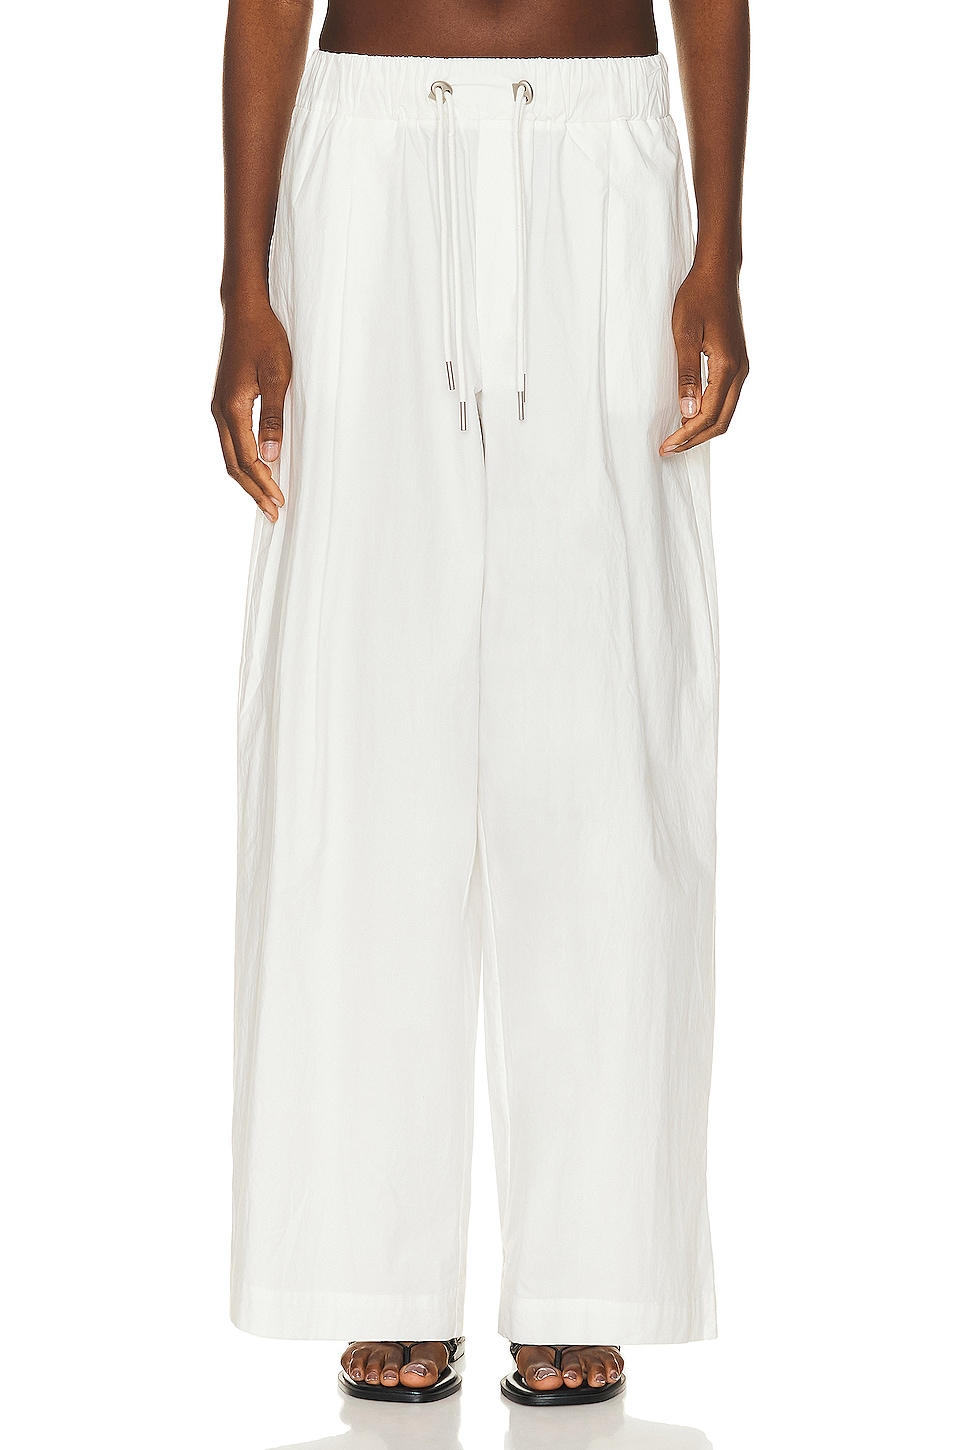 Image 1 of St. Agni Relaxed Drawstring Pant in White